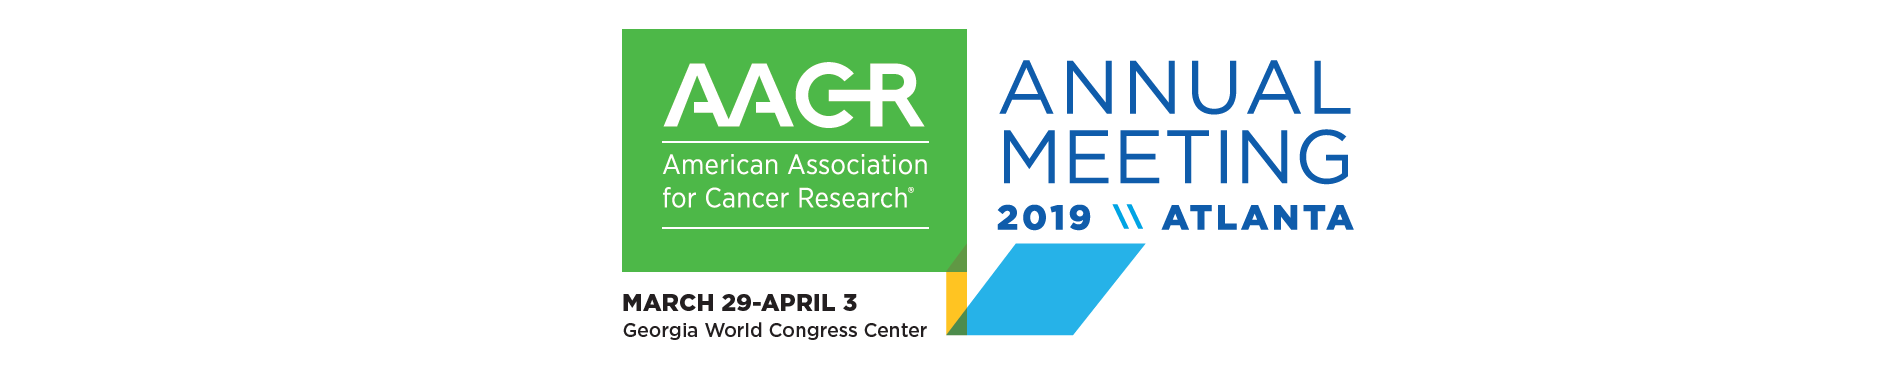 AACR annual meeting 2019